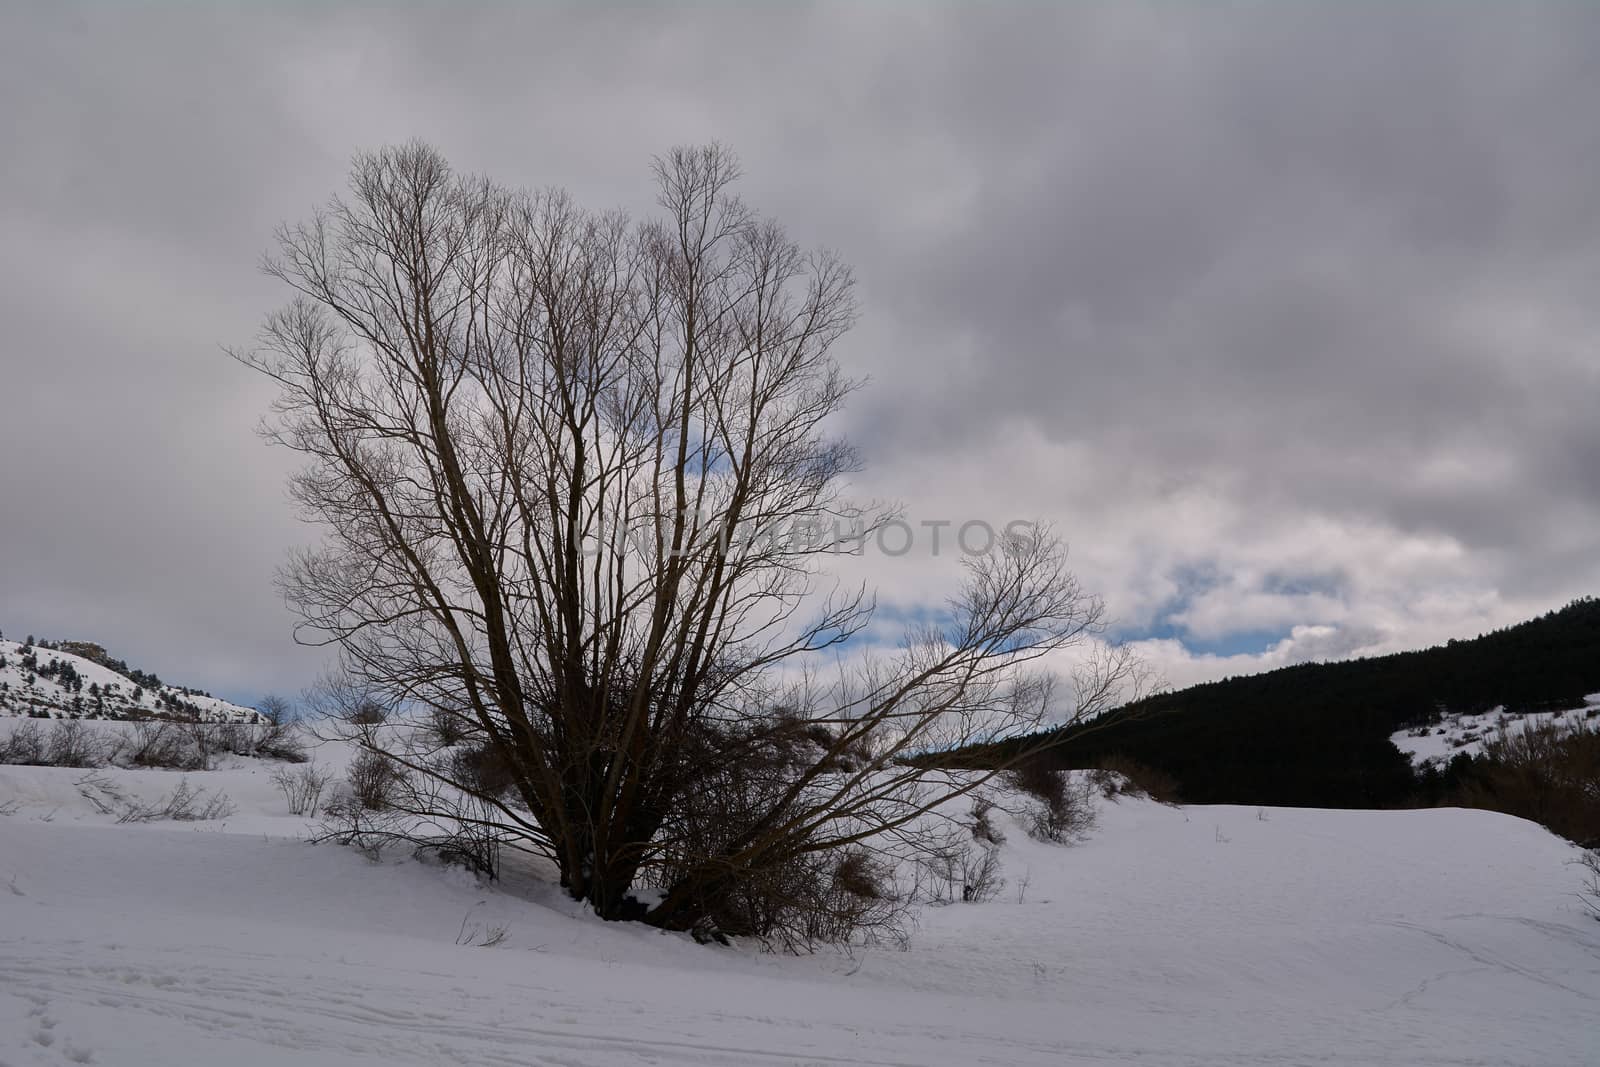 Snowy and cold mountain forest landscape by raul_ruiz